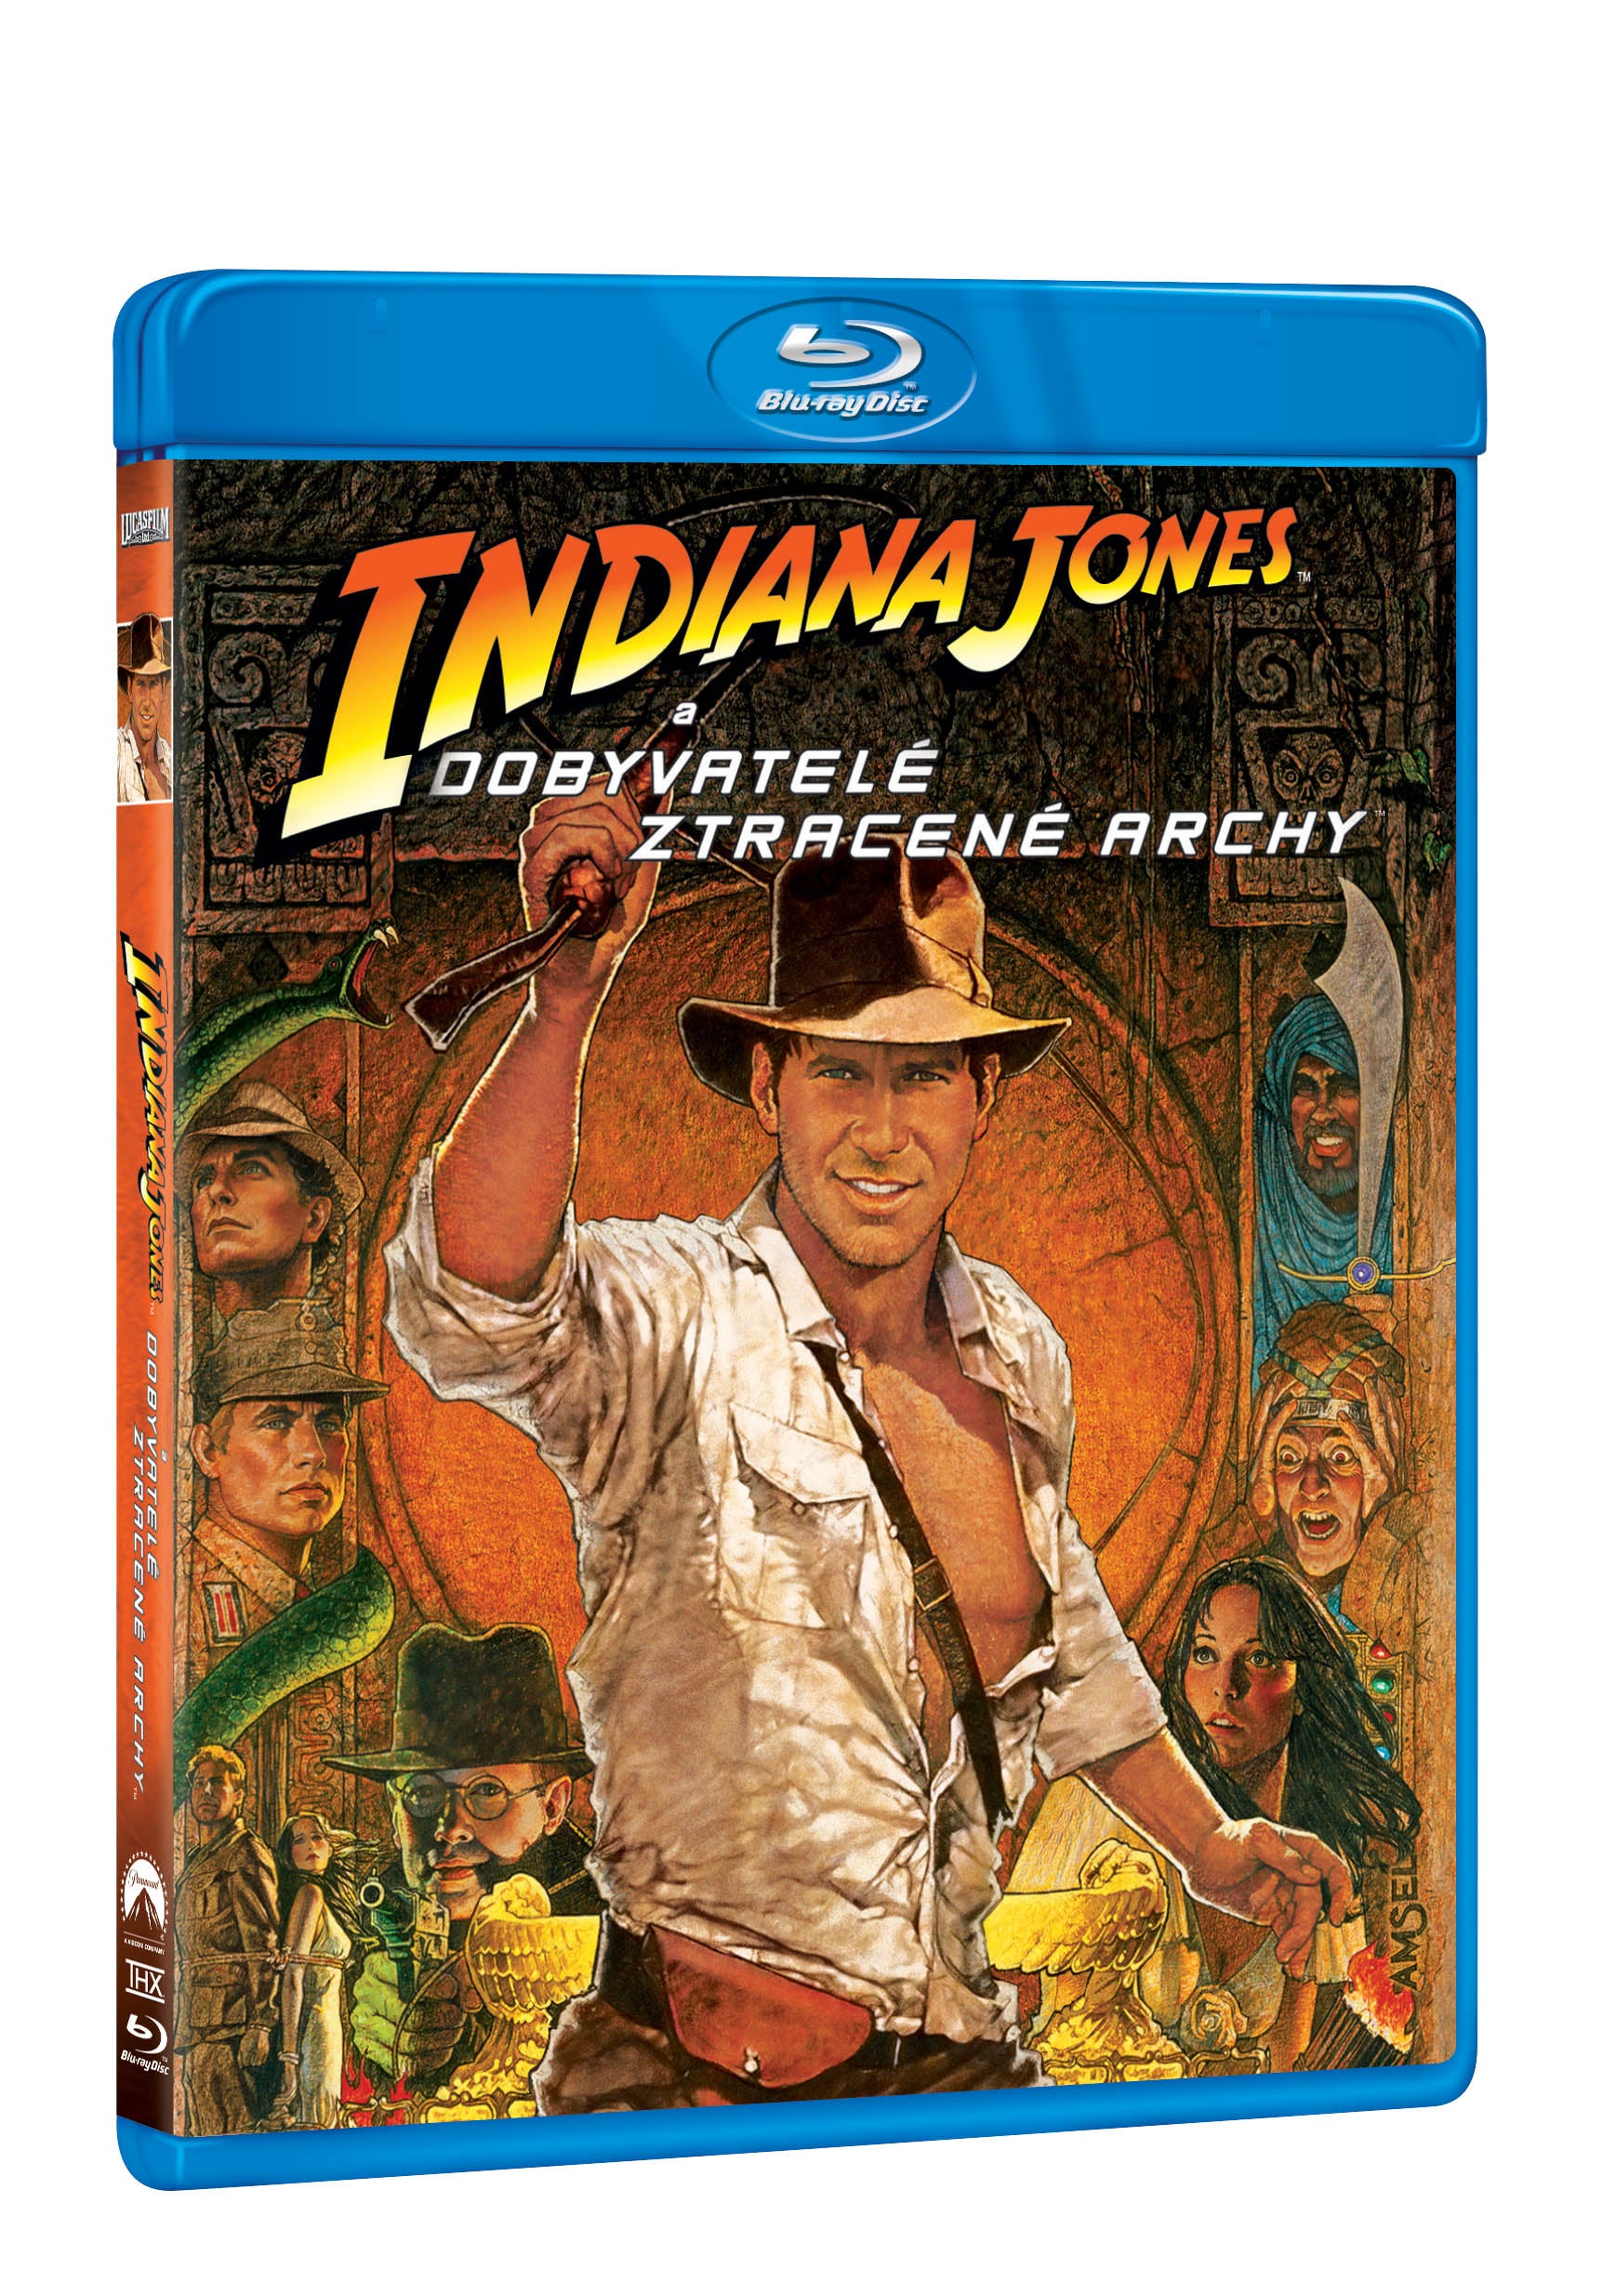 Indiana Jones a dobyvatele ztracene archy BD / Indiana Jones And The Raiders Of The Lost Ark - Czech version